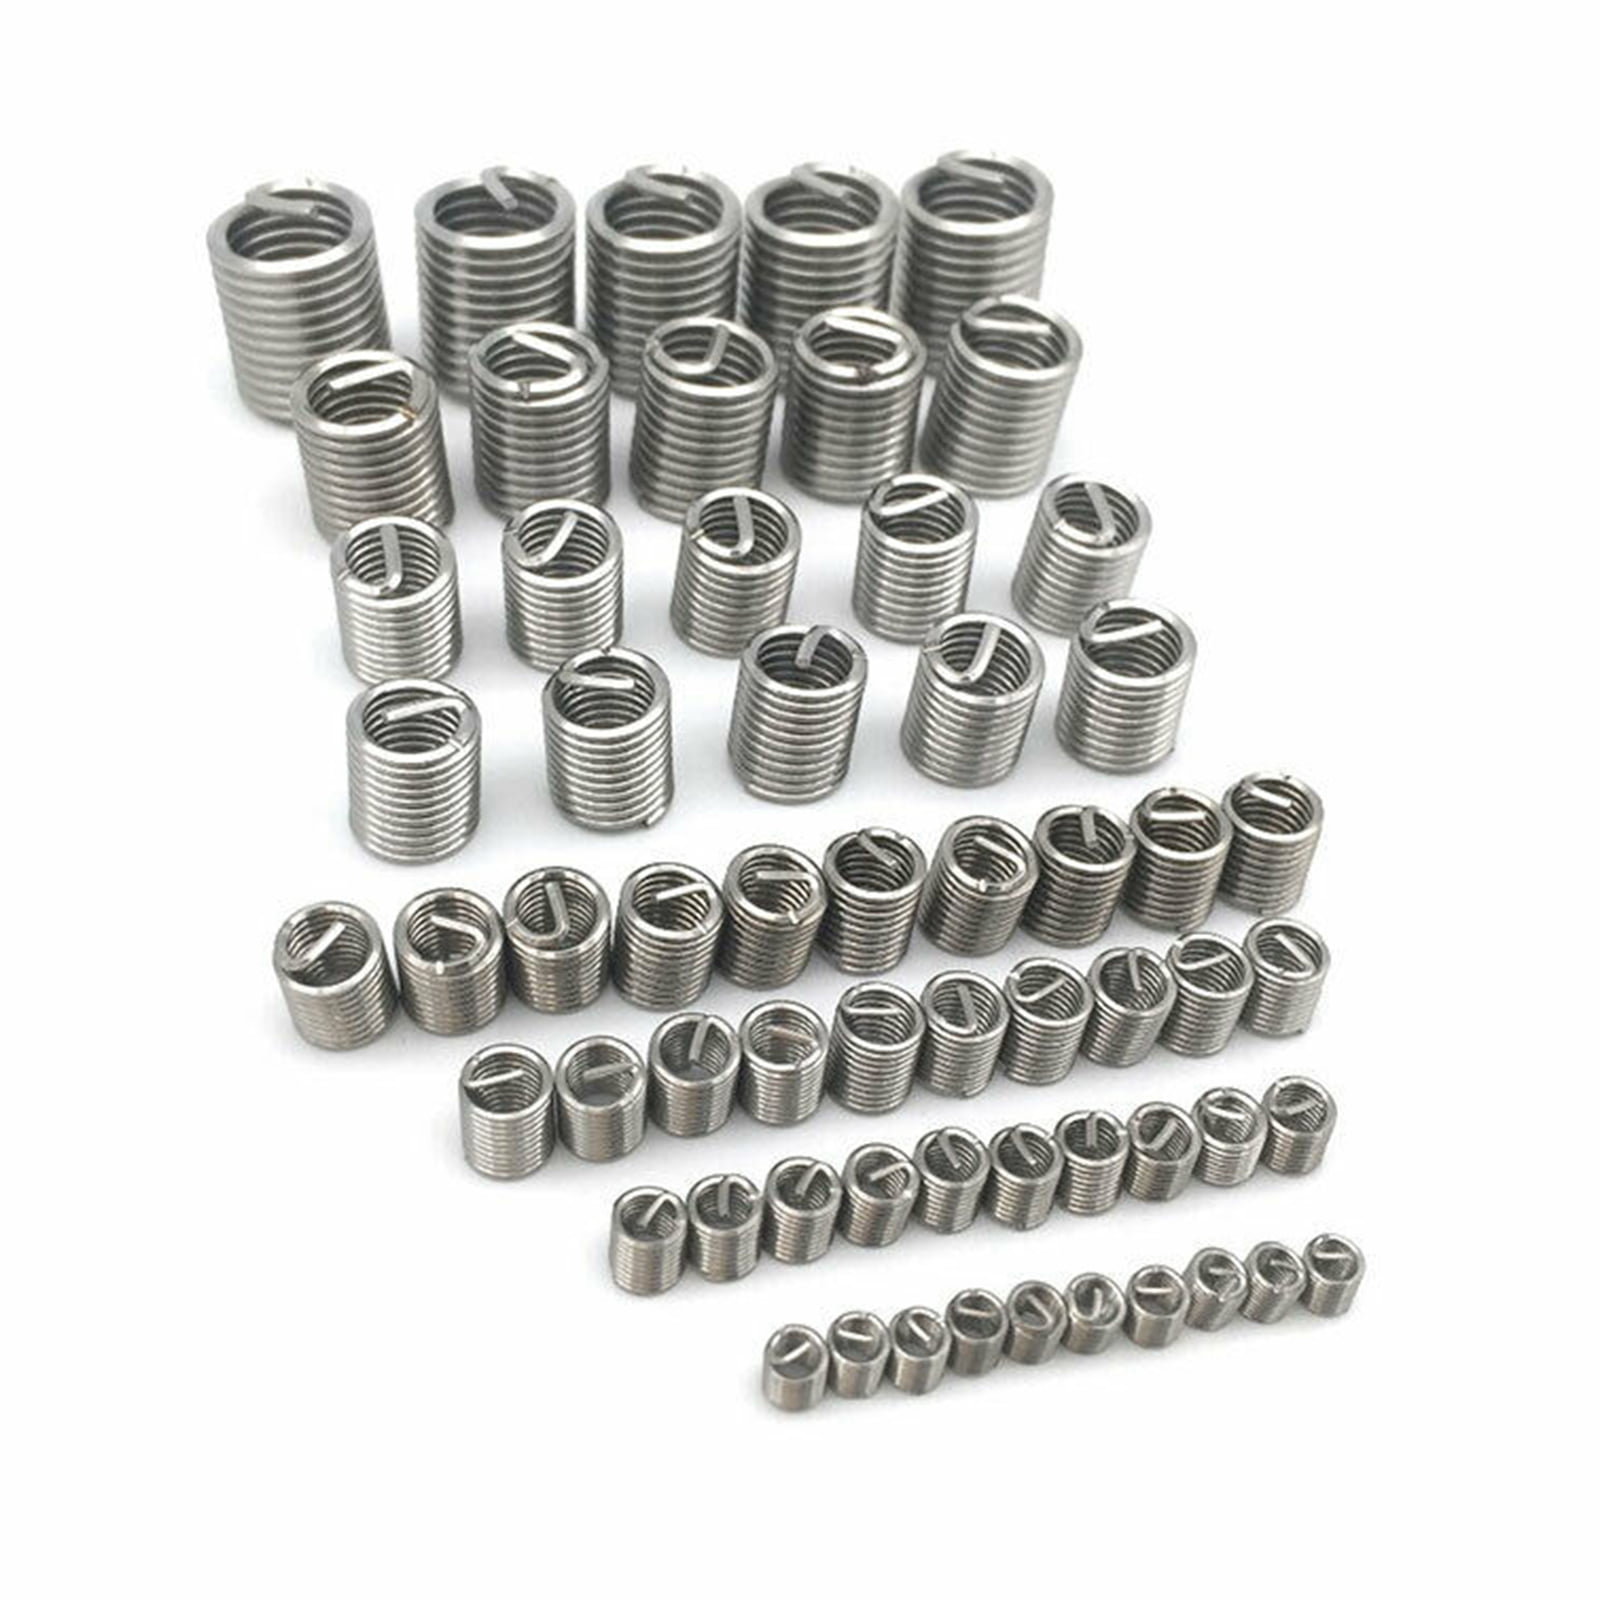 150pcs M3 M4 M6 M8 M10 M12 304 Thread Repair Insert Stainless Steel Coiled Wire Helical Screw Thread Inserts Assortment Kit with Plastic Case Box 